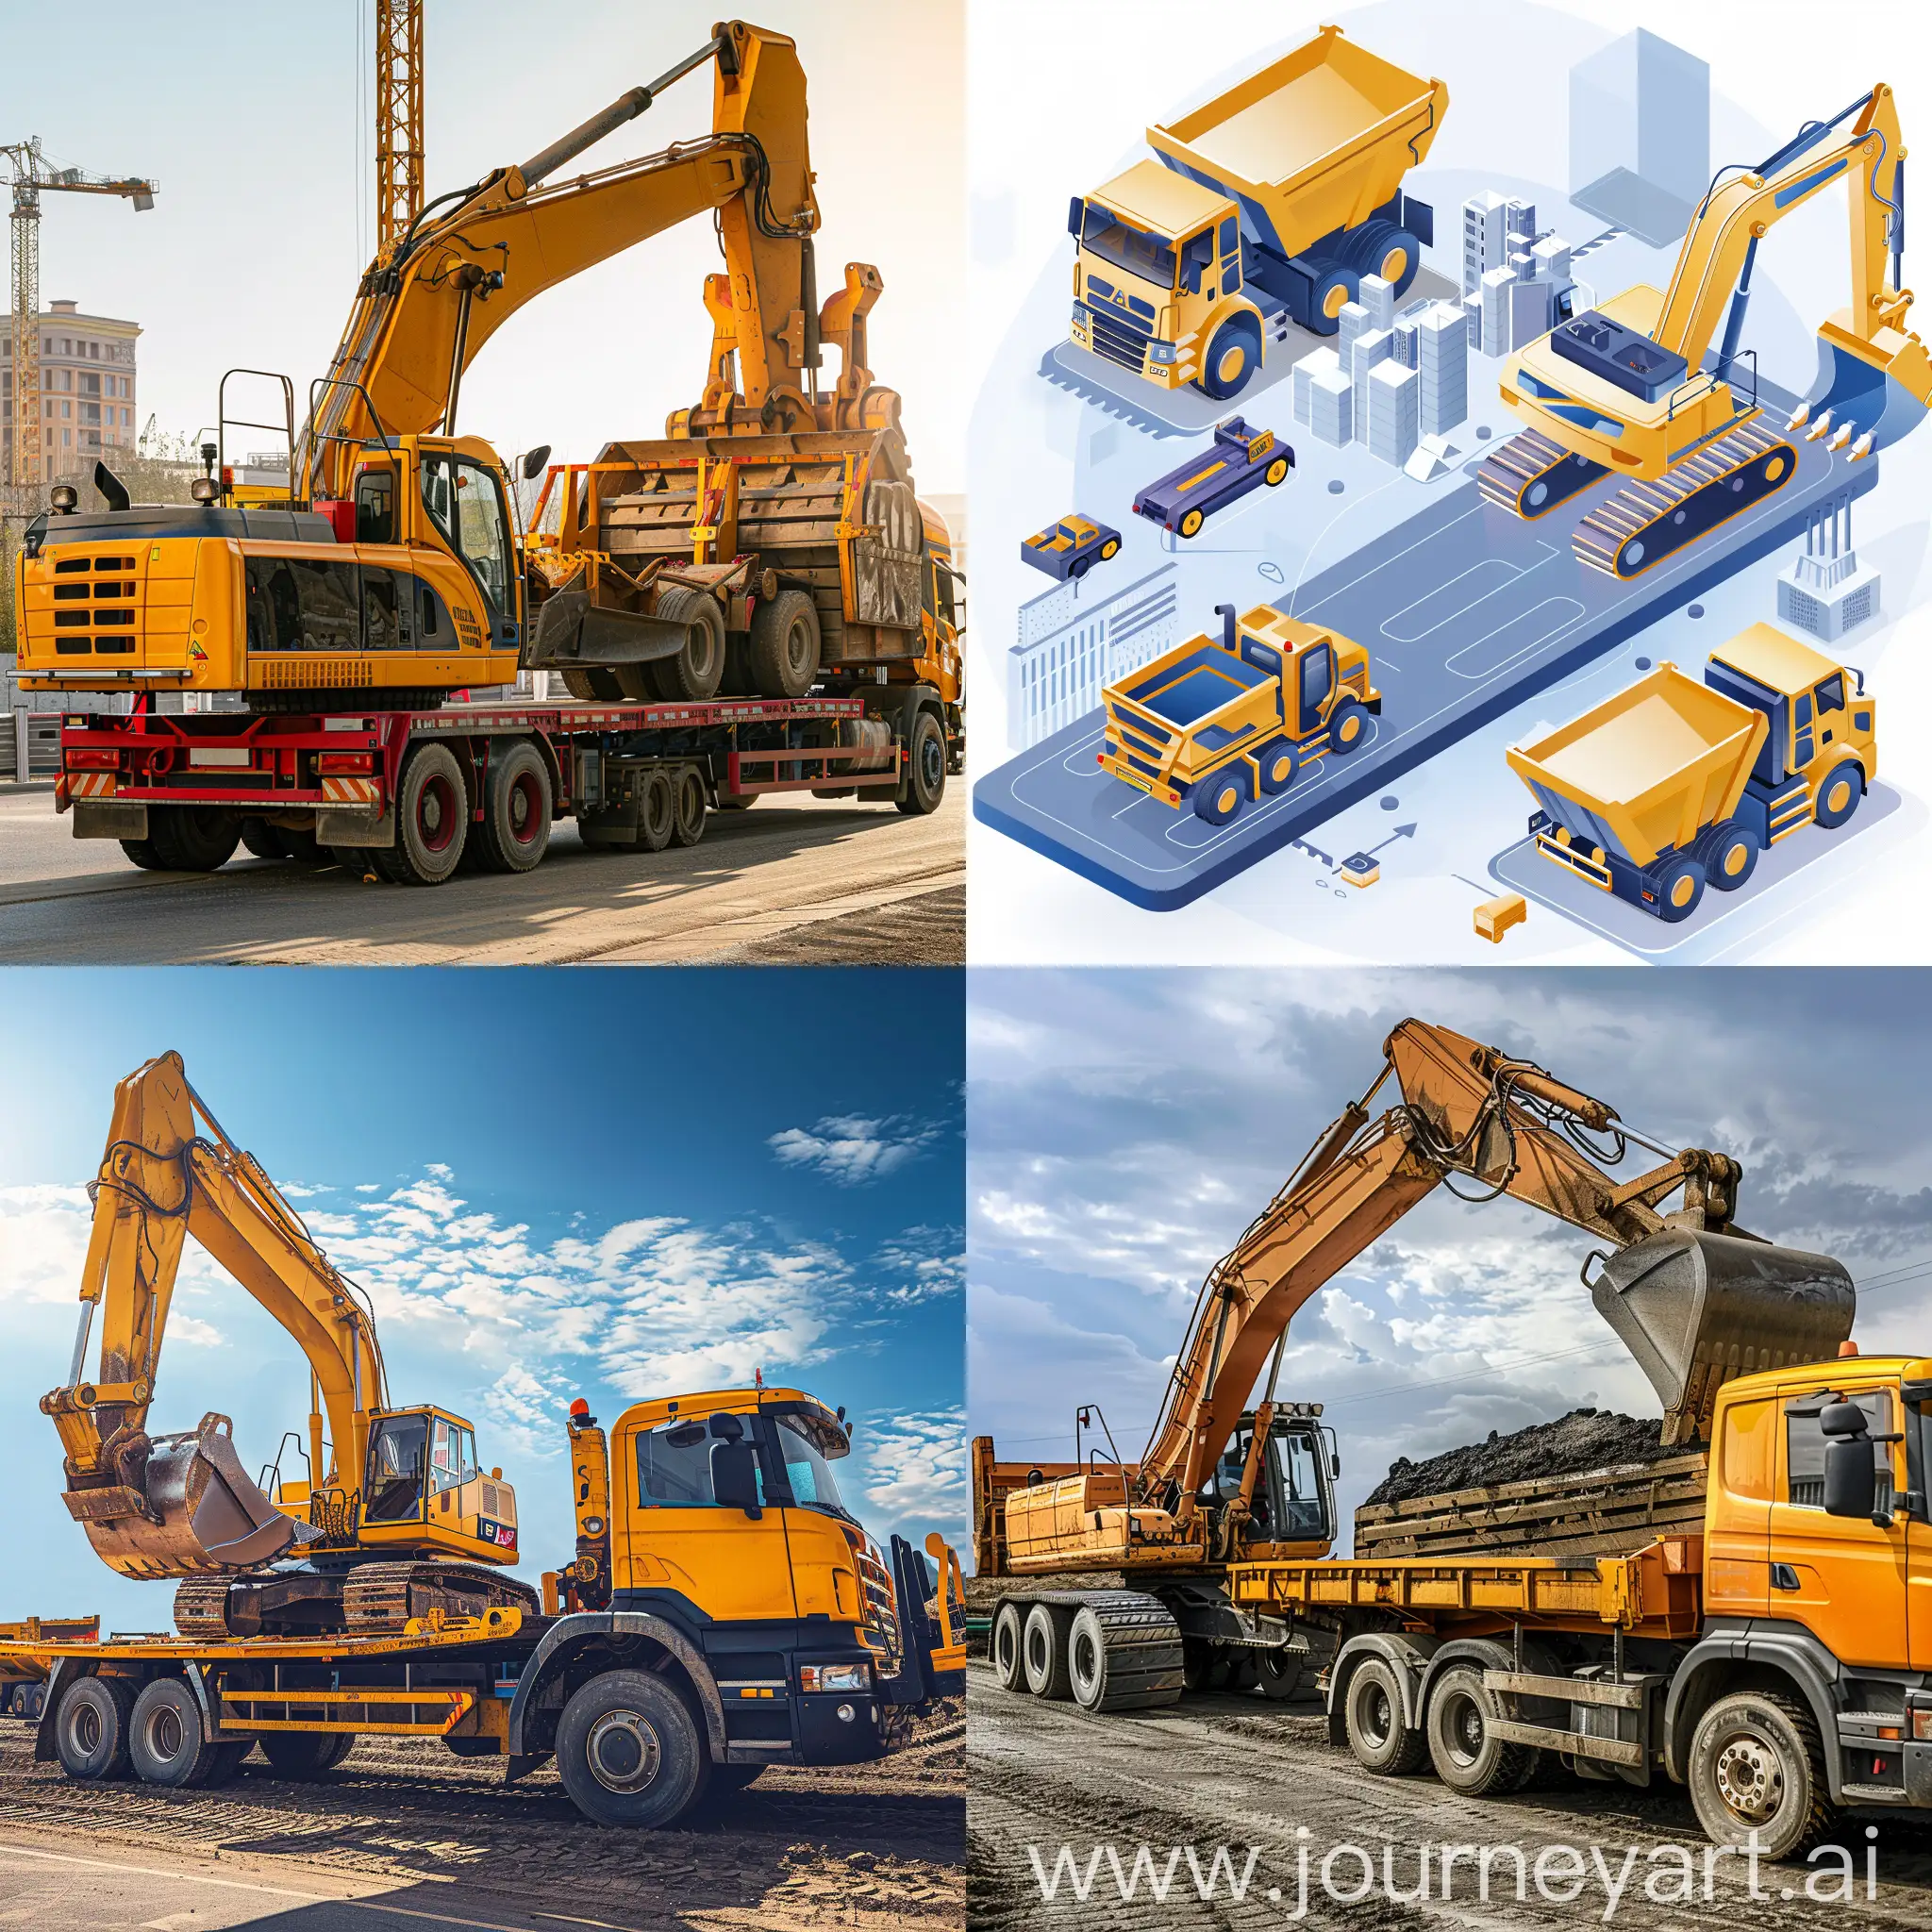 Comprehensive-Heavy-Construction-Equipment-Rental-Platform-with-Seamless-Deals-and-Transport-Services